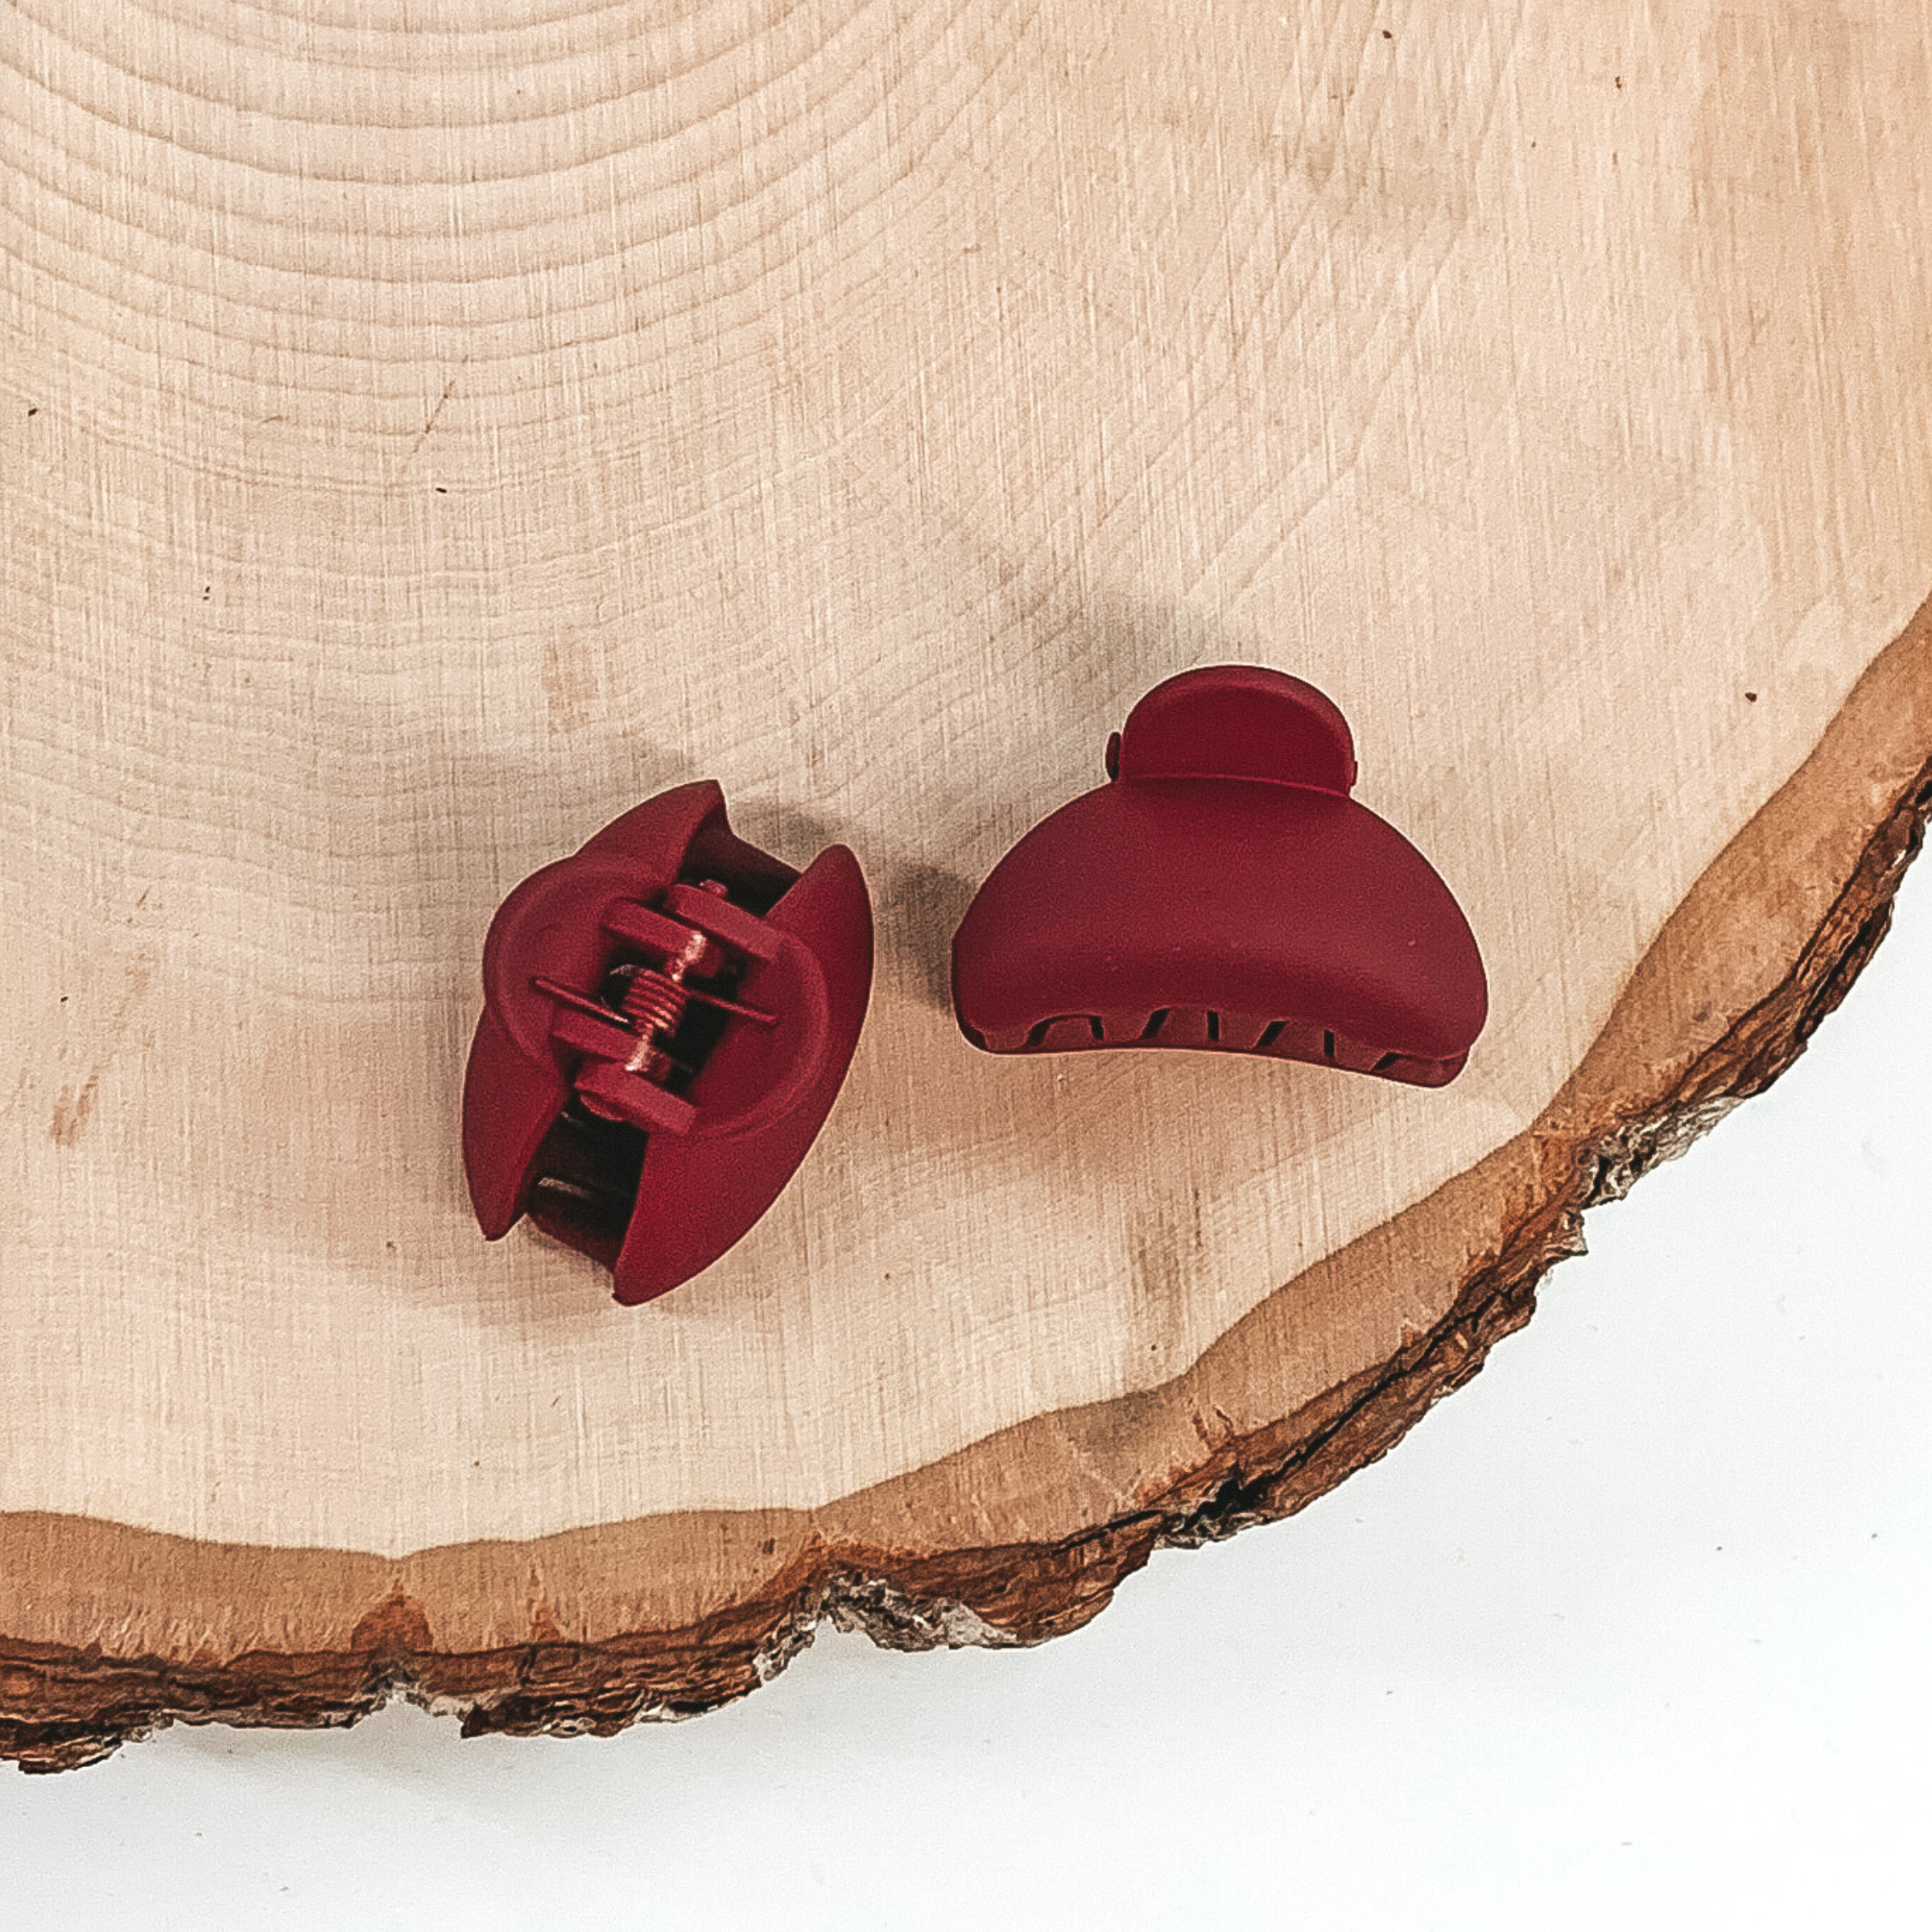 Matte red oval claw clips with an oval cutout. This clip is pictured on a piece of wood on a white background.